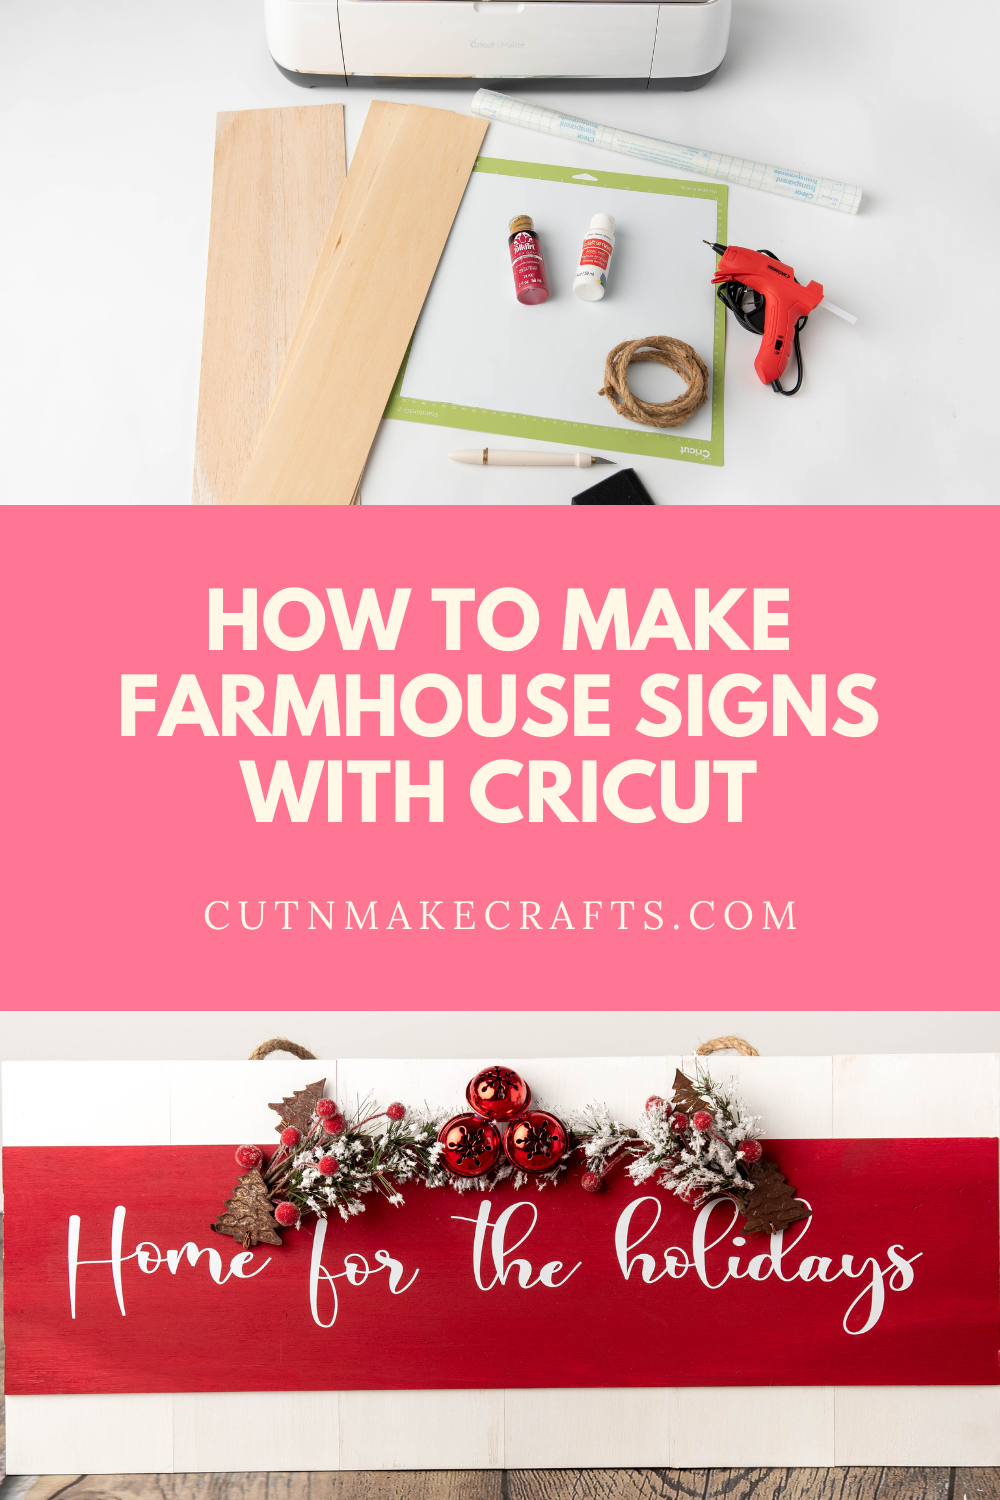 Is It Easy to Use A Cricut? - We Got The Funk